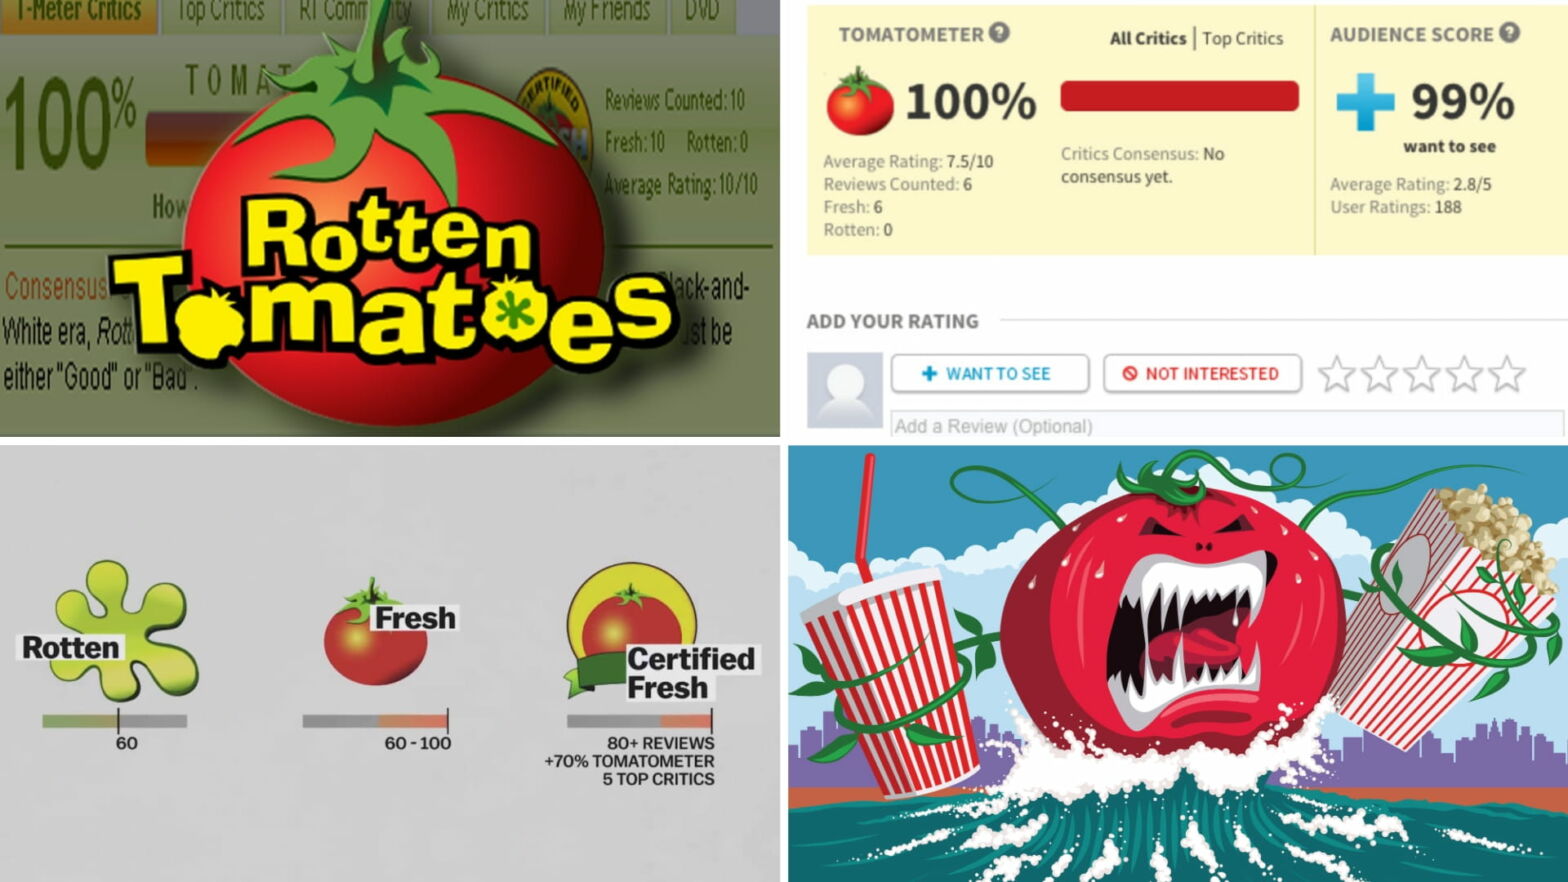 best movie reviews rotten tomatoes